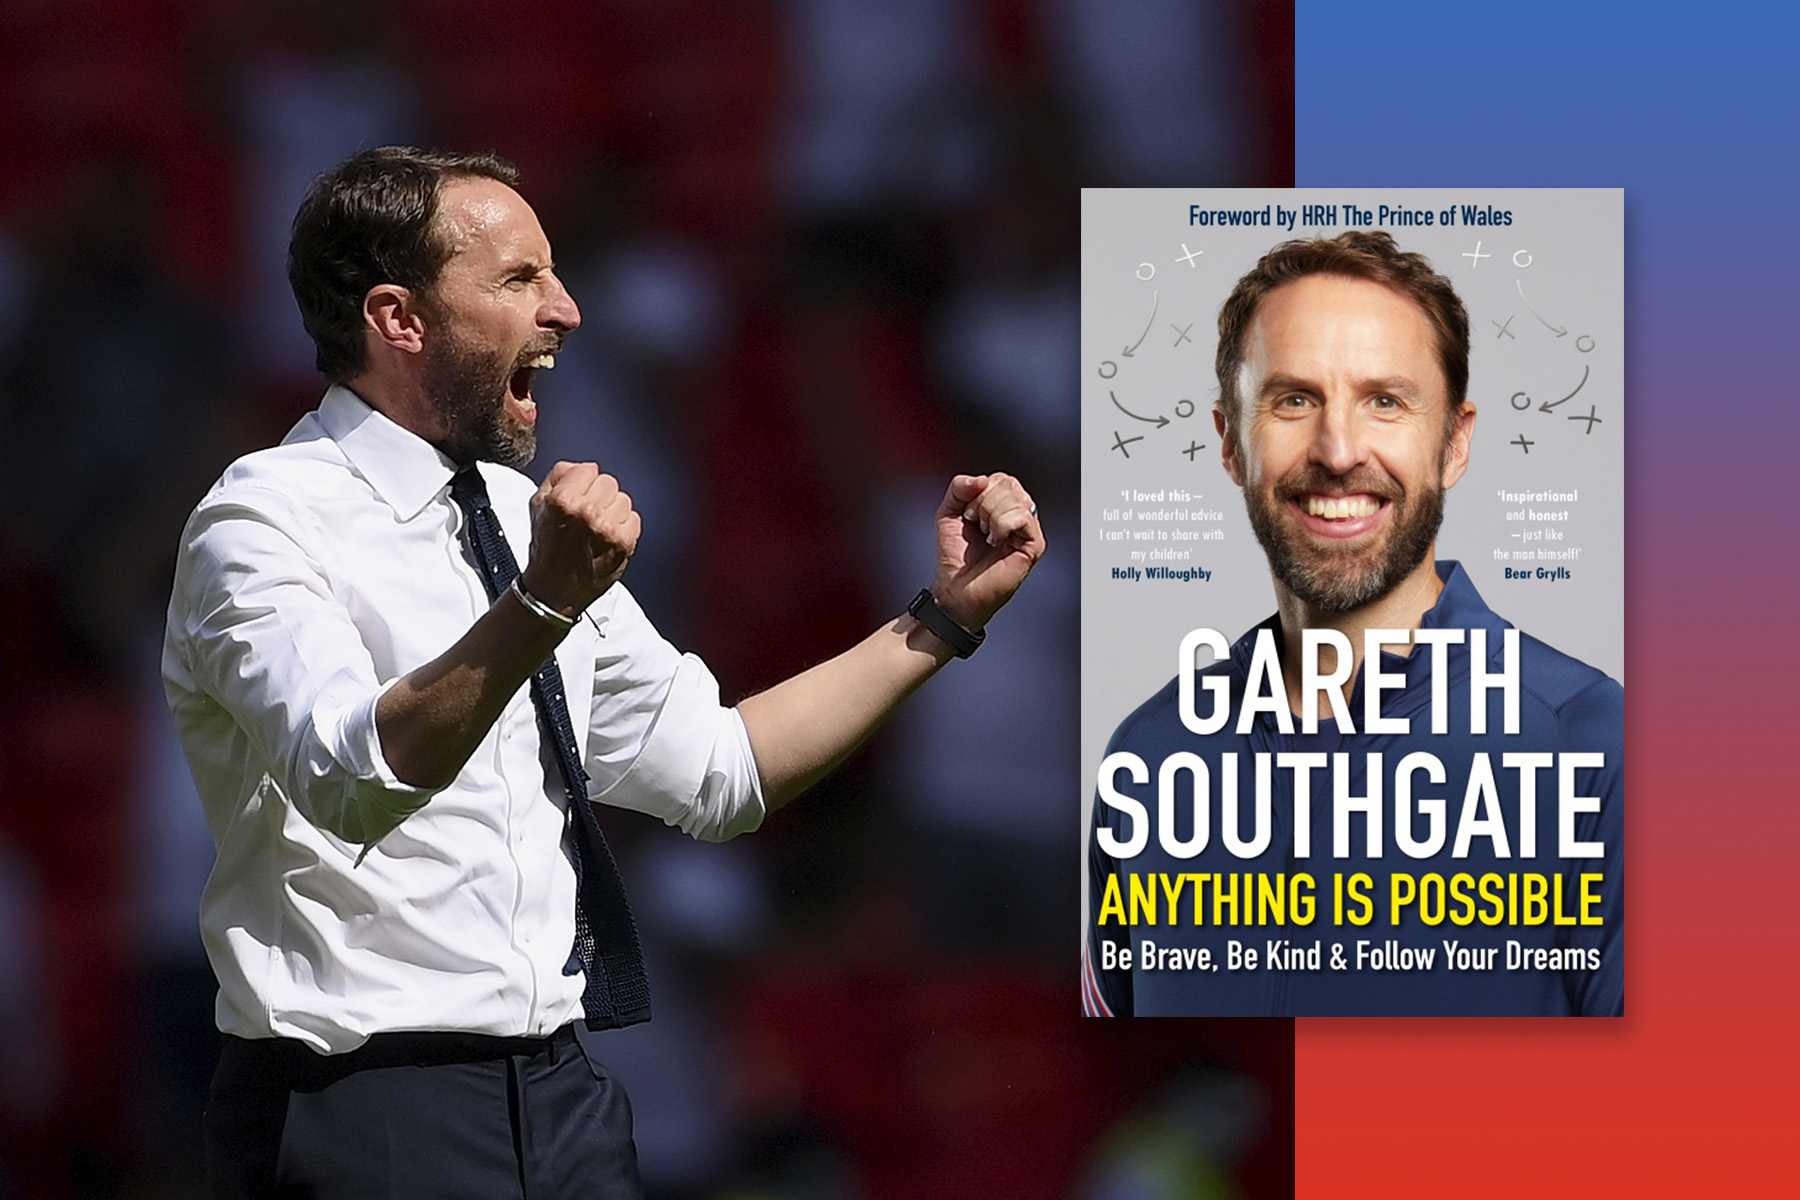 The book Anything Is Possible by Gareth Southgate on an ombre blue-to-red background, next to a photo of Southgate celebrating.